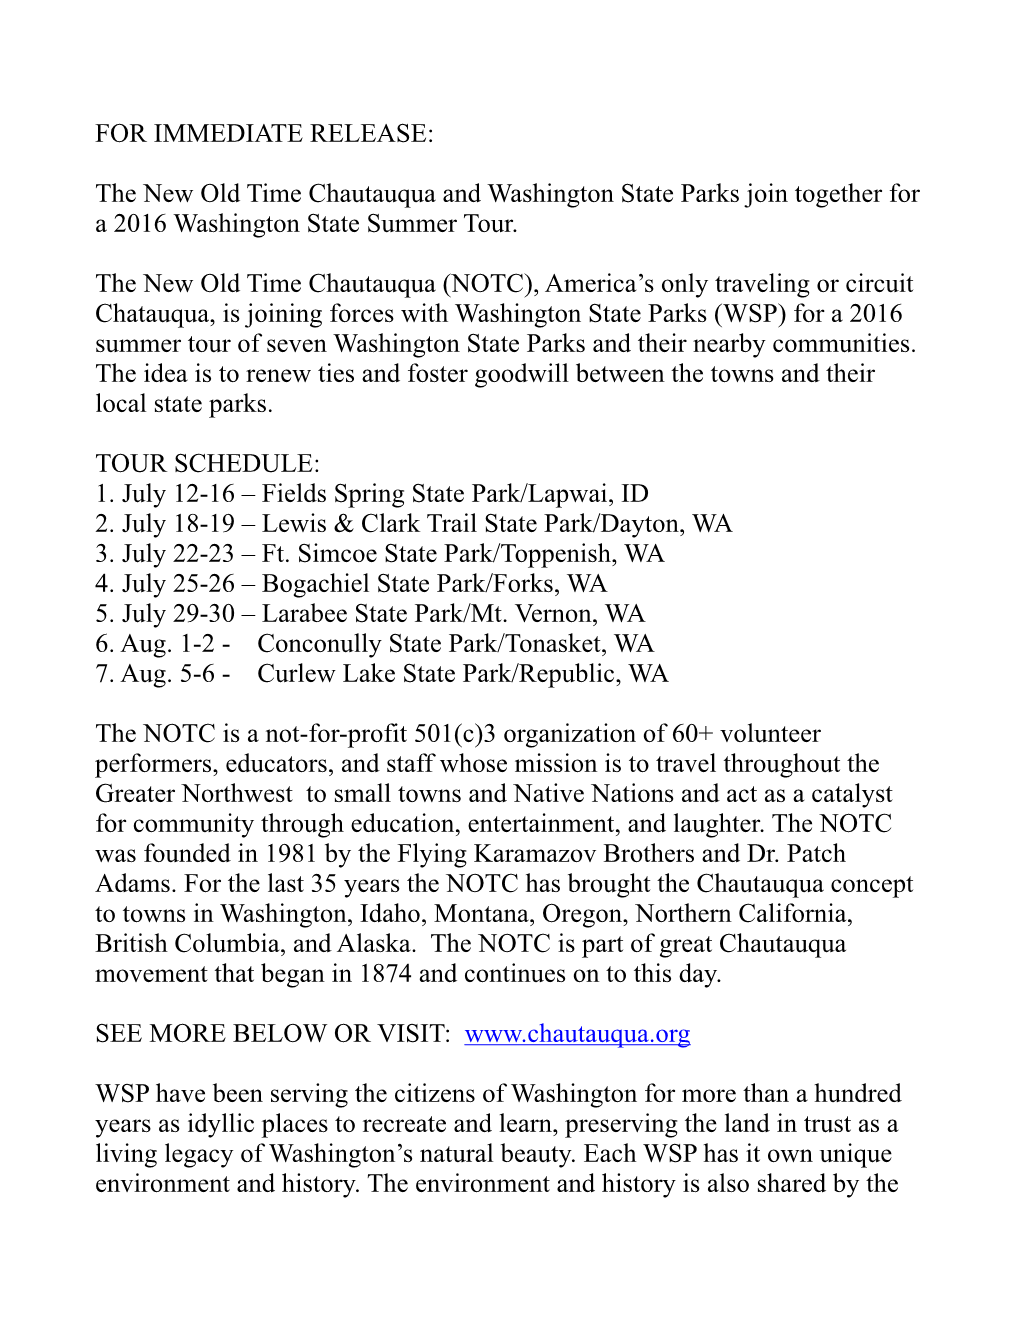 For Immediate Release 2016 Wsp Tour Release